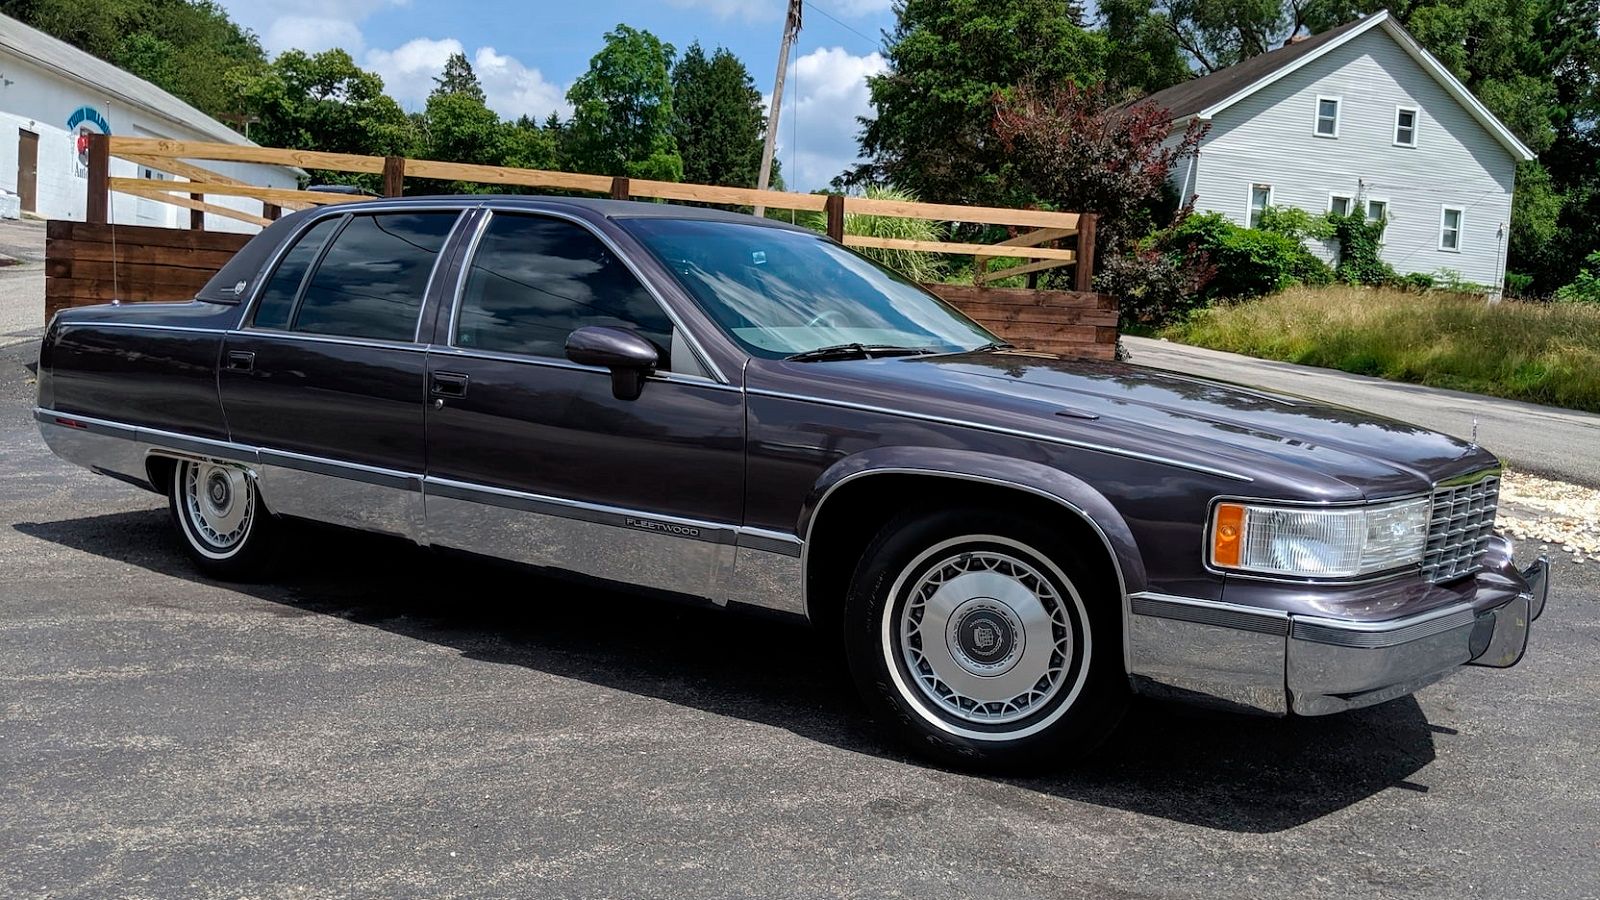 A parked 1994 Cadillac Fleetwood Brougham